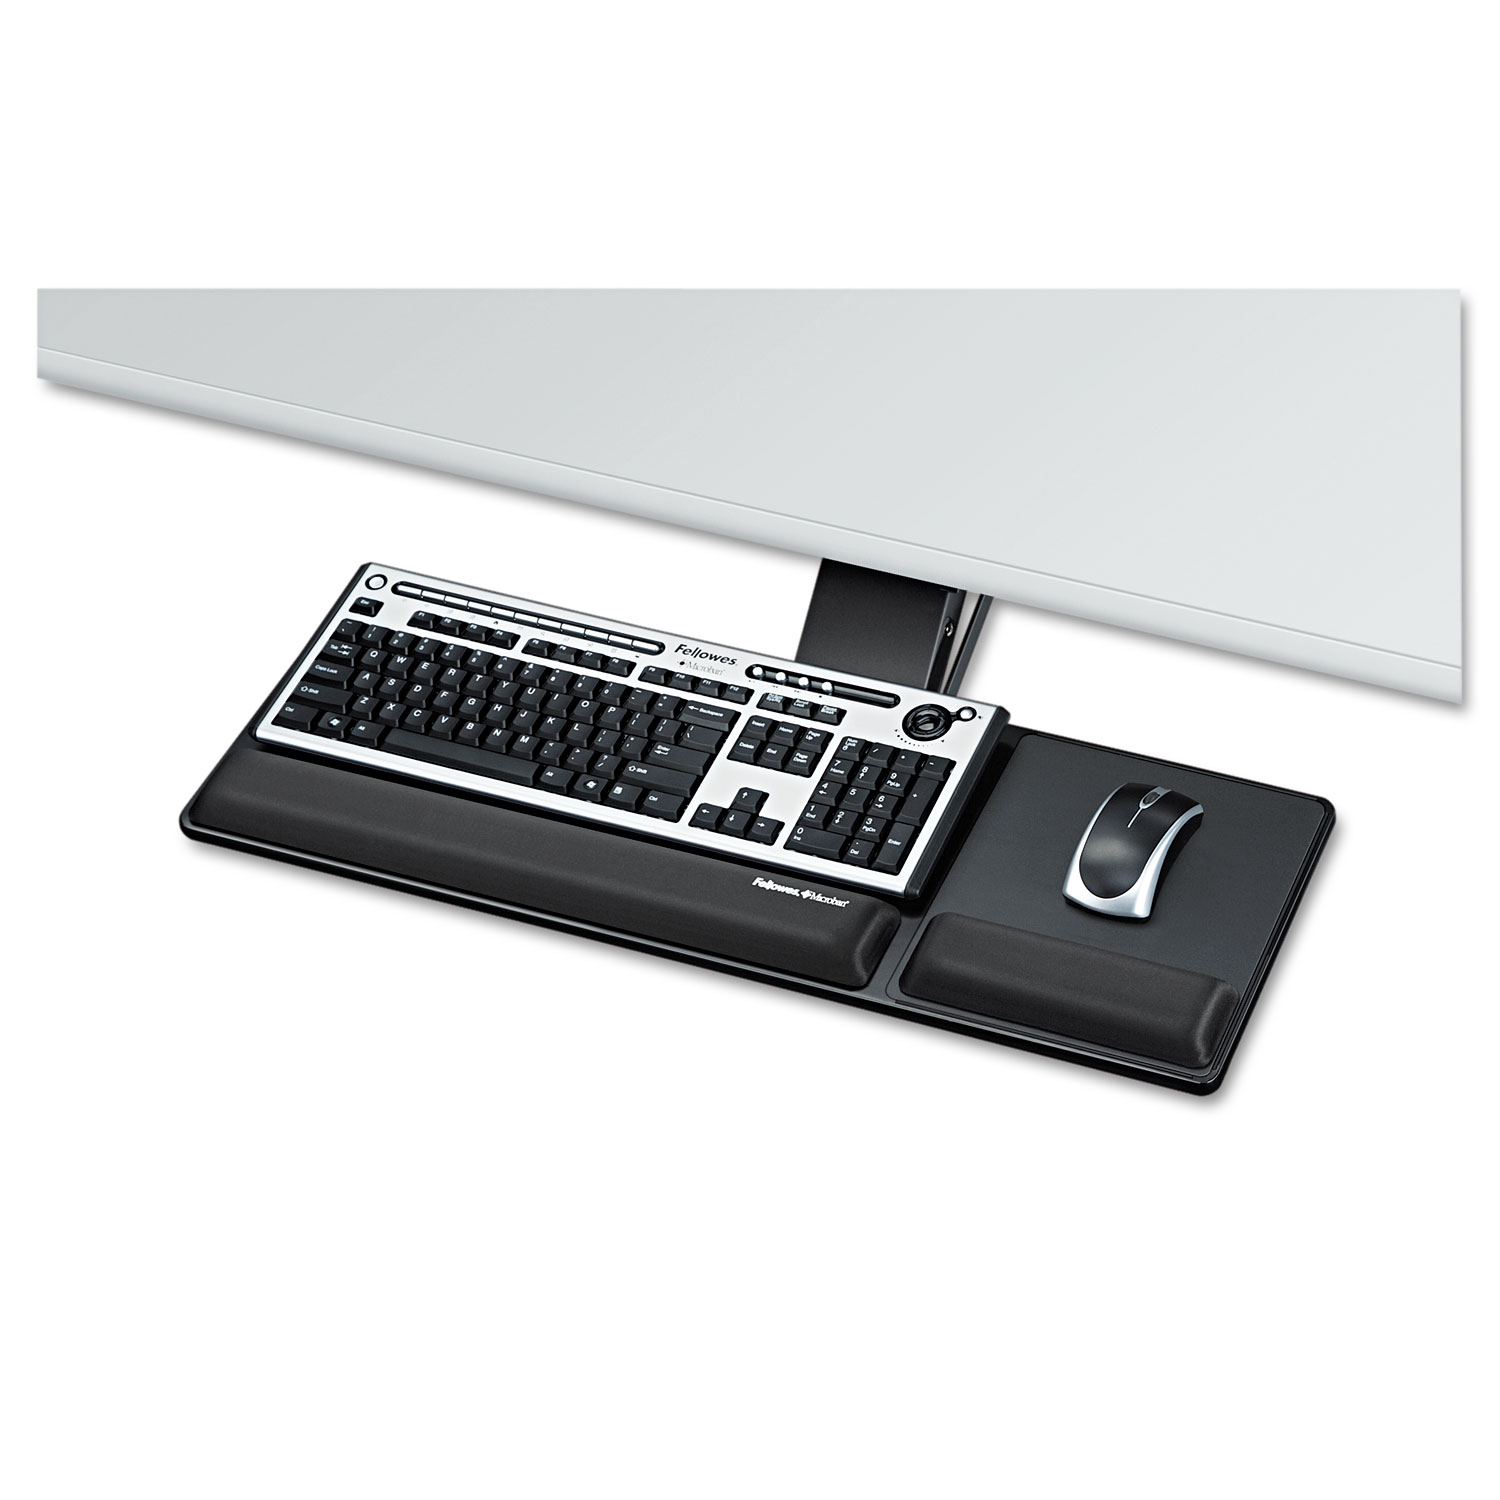 Designer Suites Compact Keyboard Tray, 19w x 9 1/2d, Black